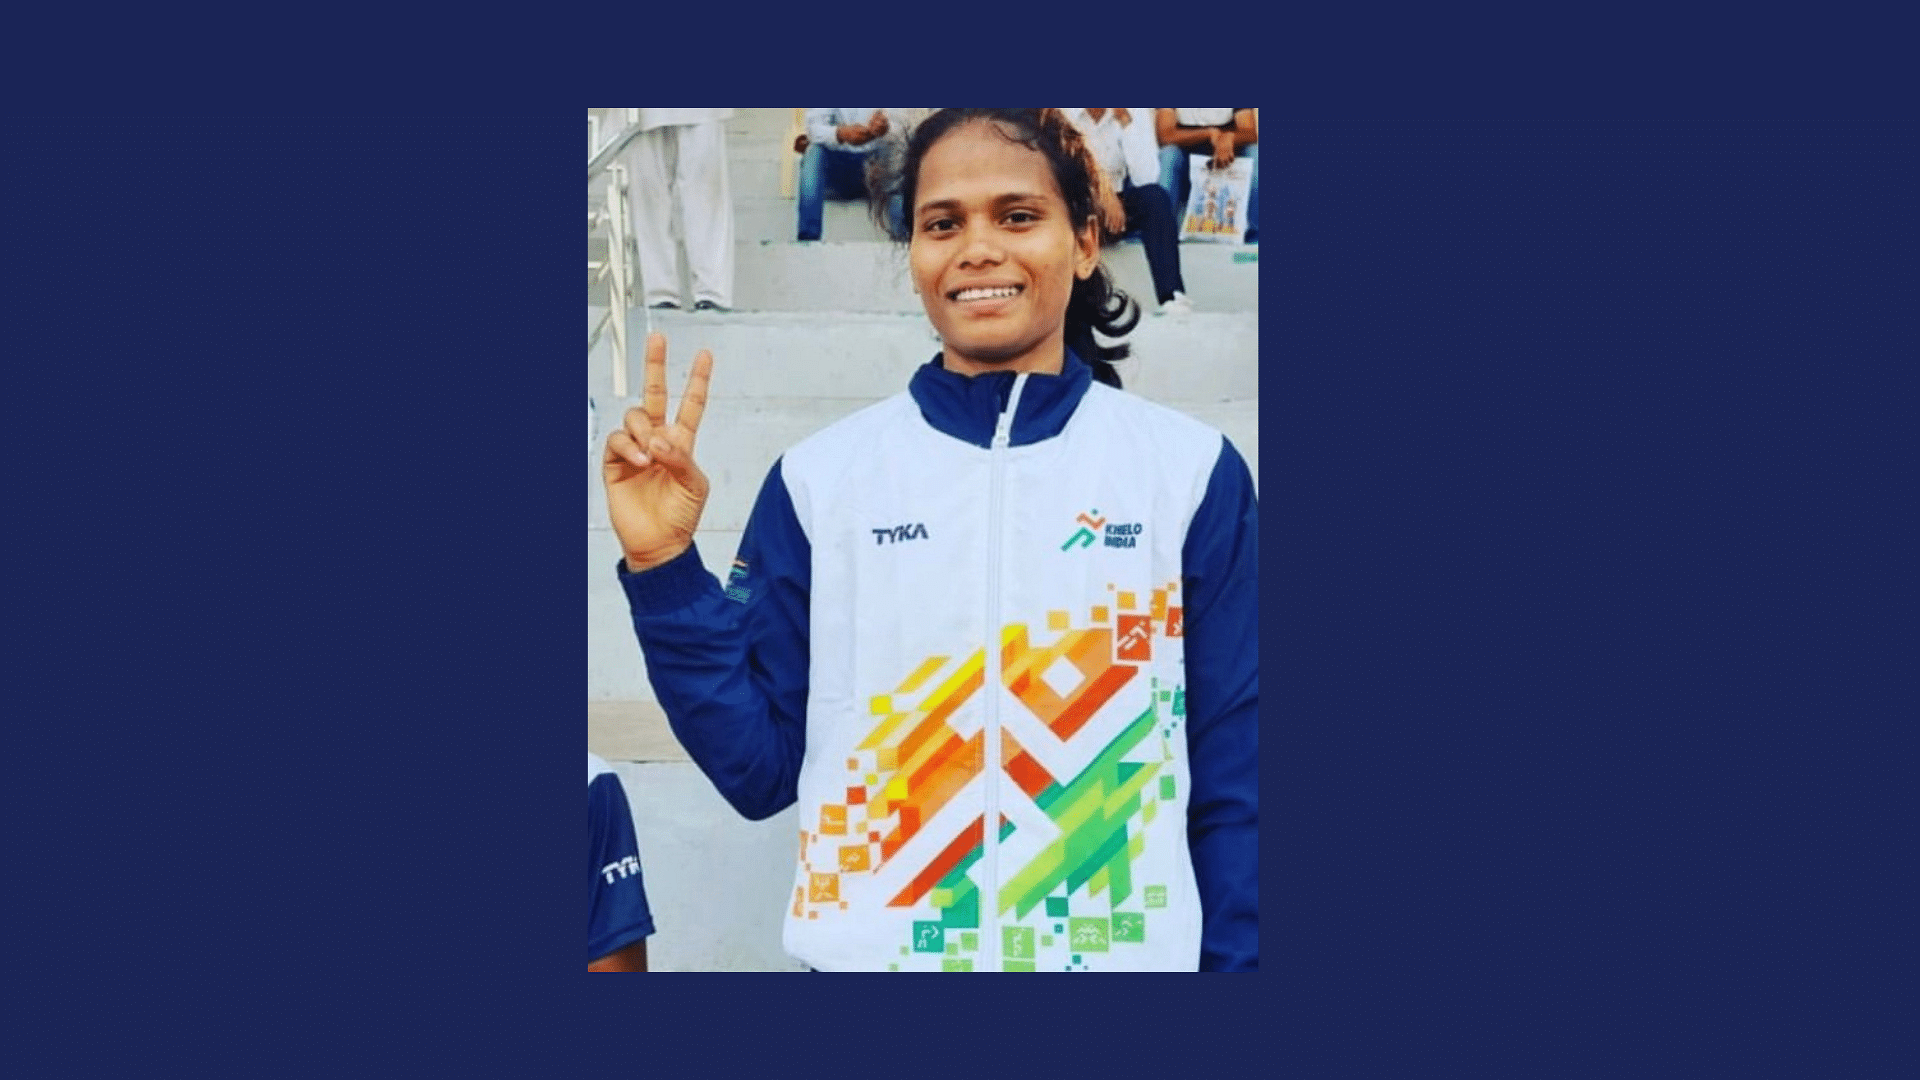 <div class="paragraphs"><p>Despite several odds, Kunja Rajitha, an Adivasi girl from a remote village in Andhra Pradesh's Alluri district, has recently won gold medal in the 400 metre sprint event at the Khelo India Youth Games 2022 held in Haryana.</p></div>